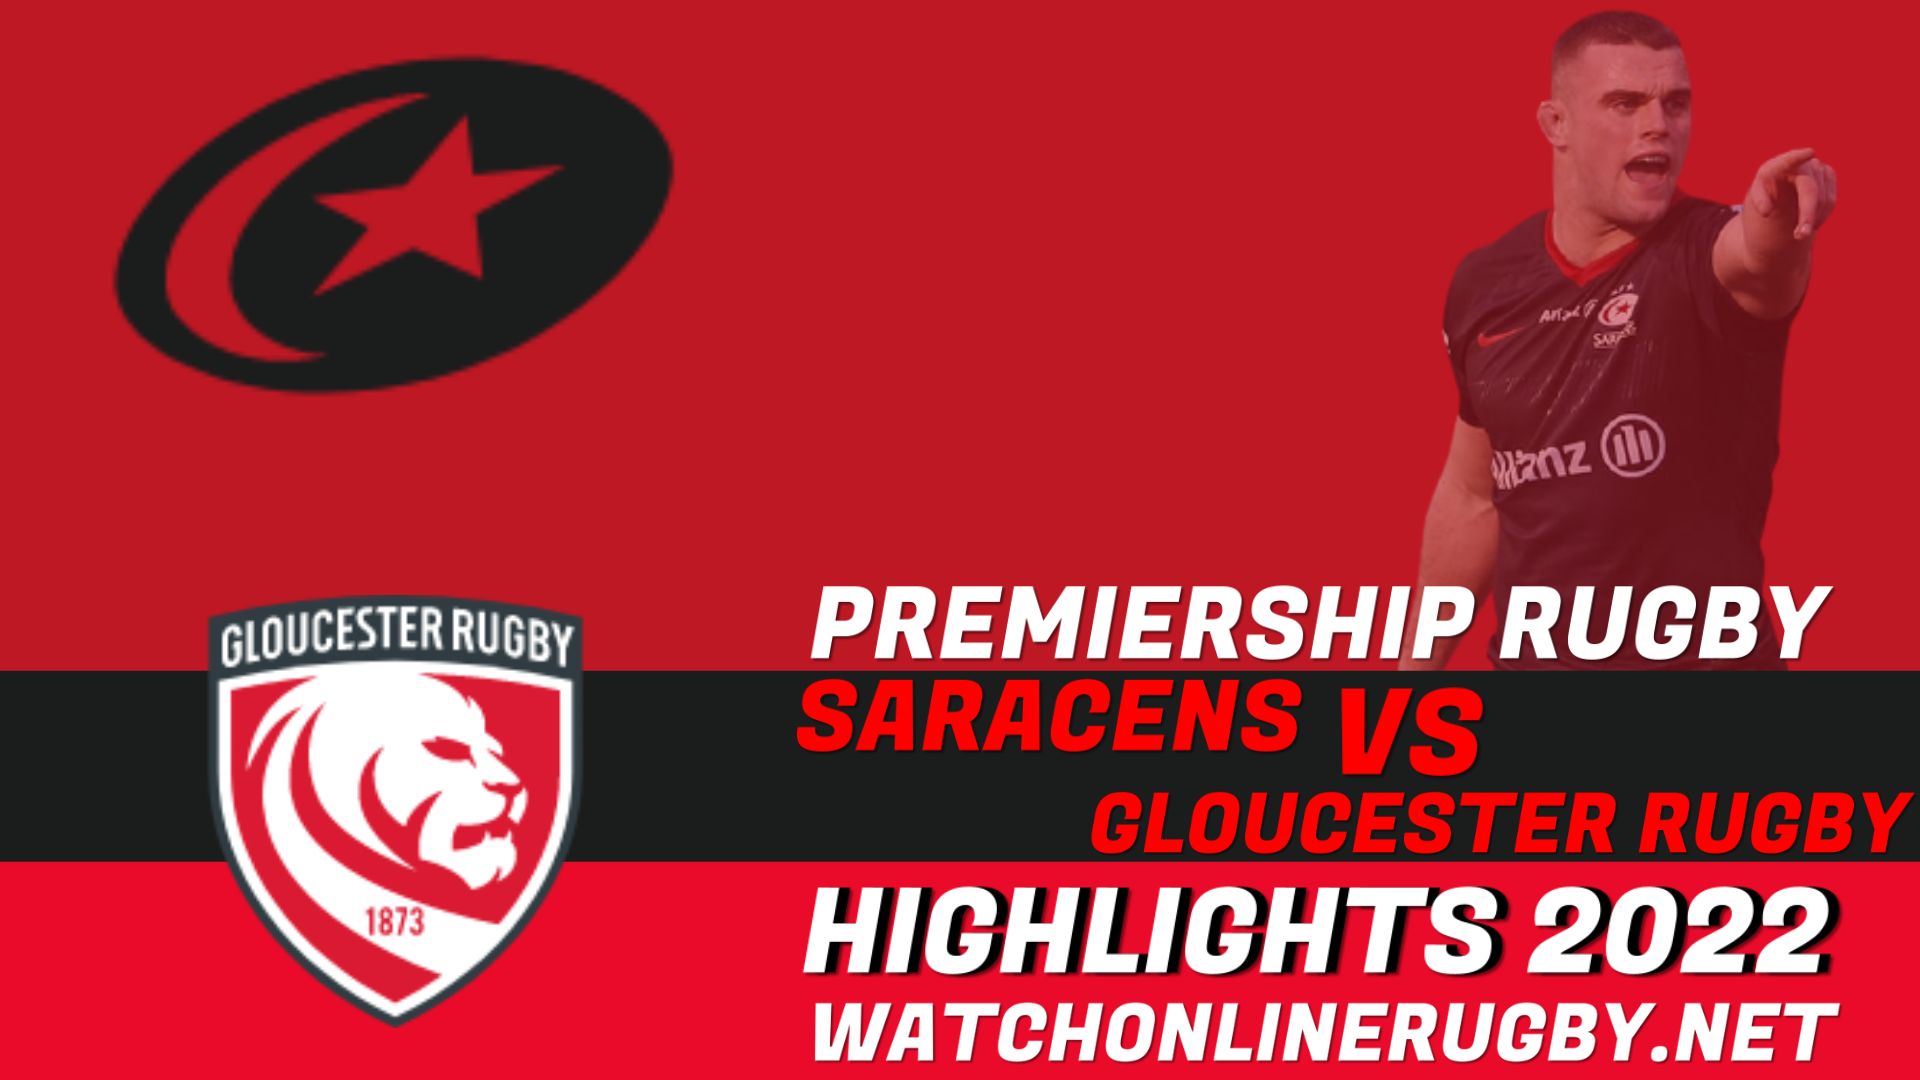 Saracens Vs Gloucester Rugby Premiership Rugby 2022 RD 13